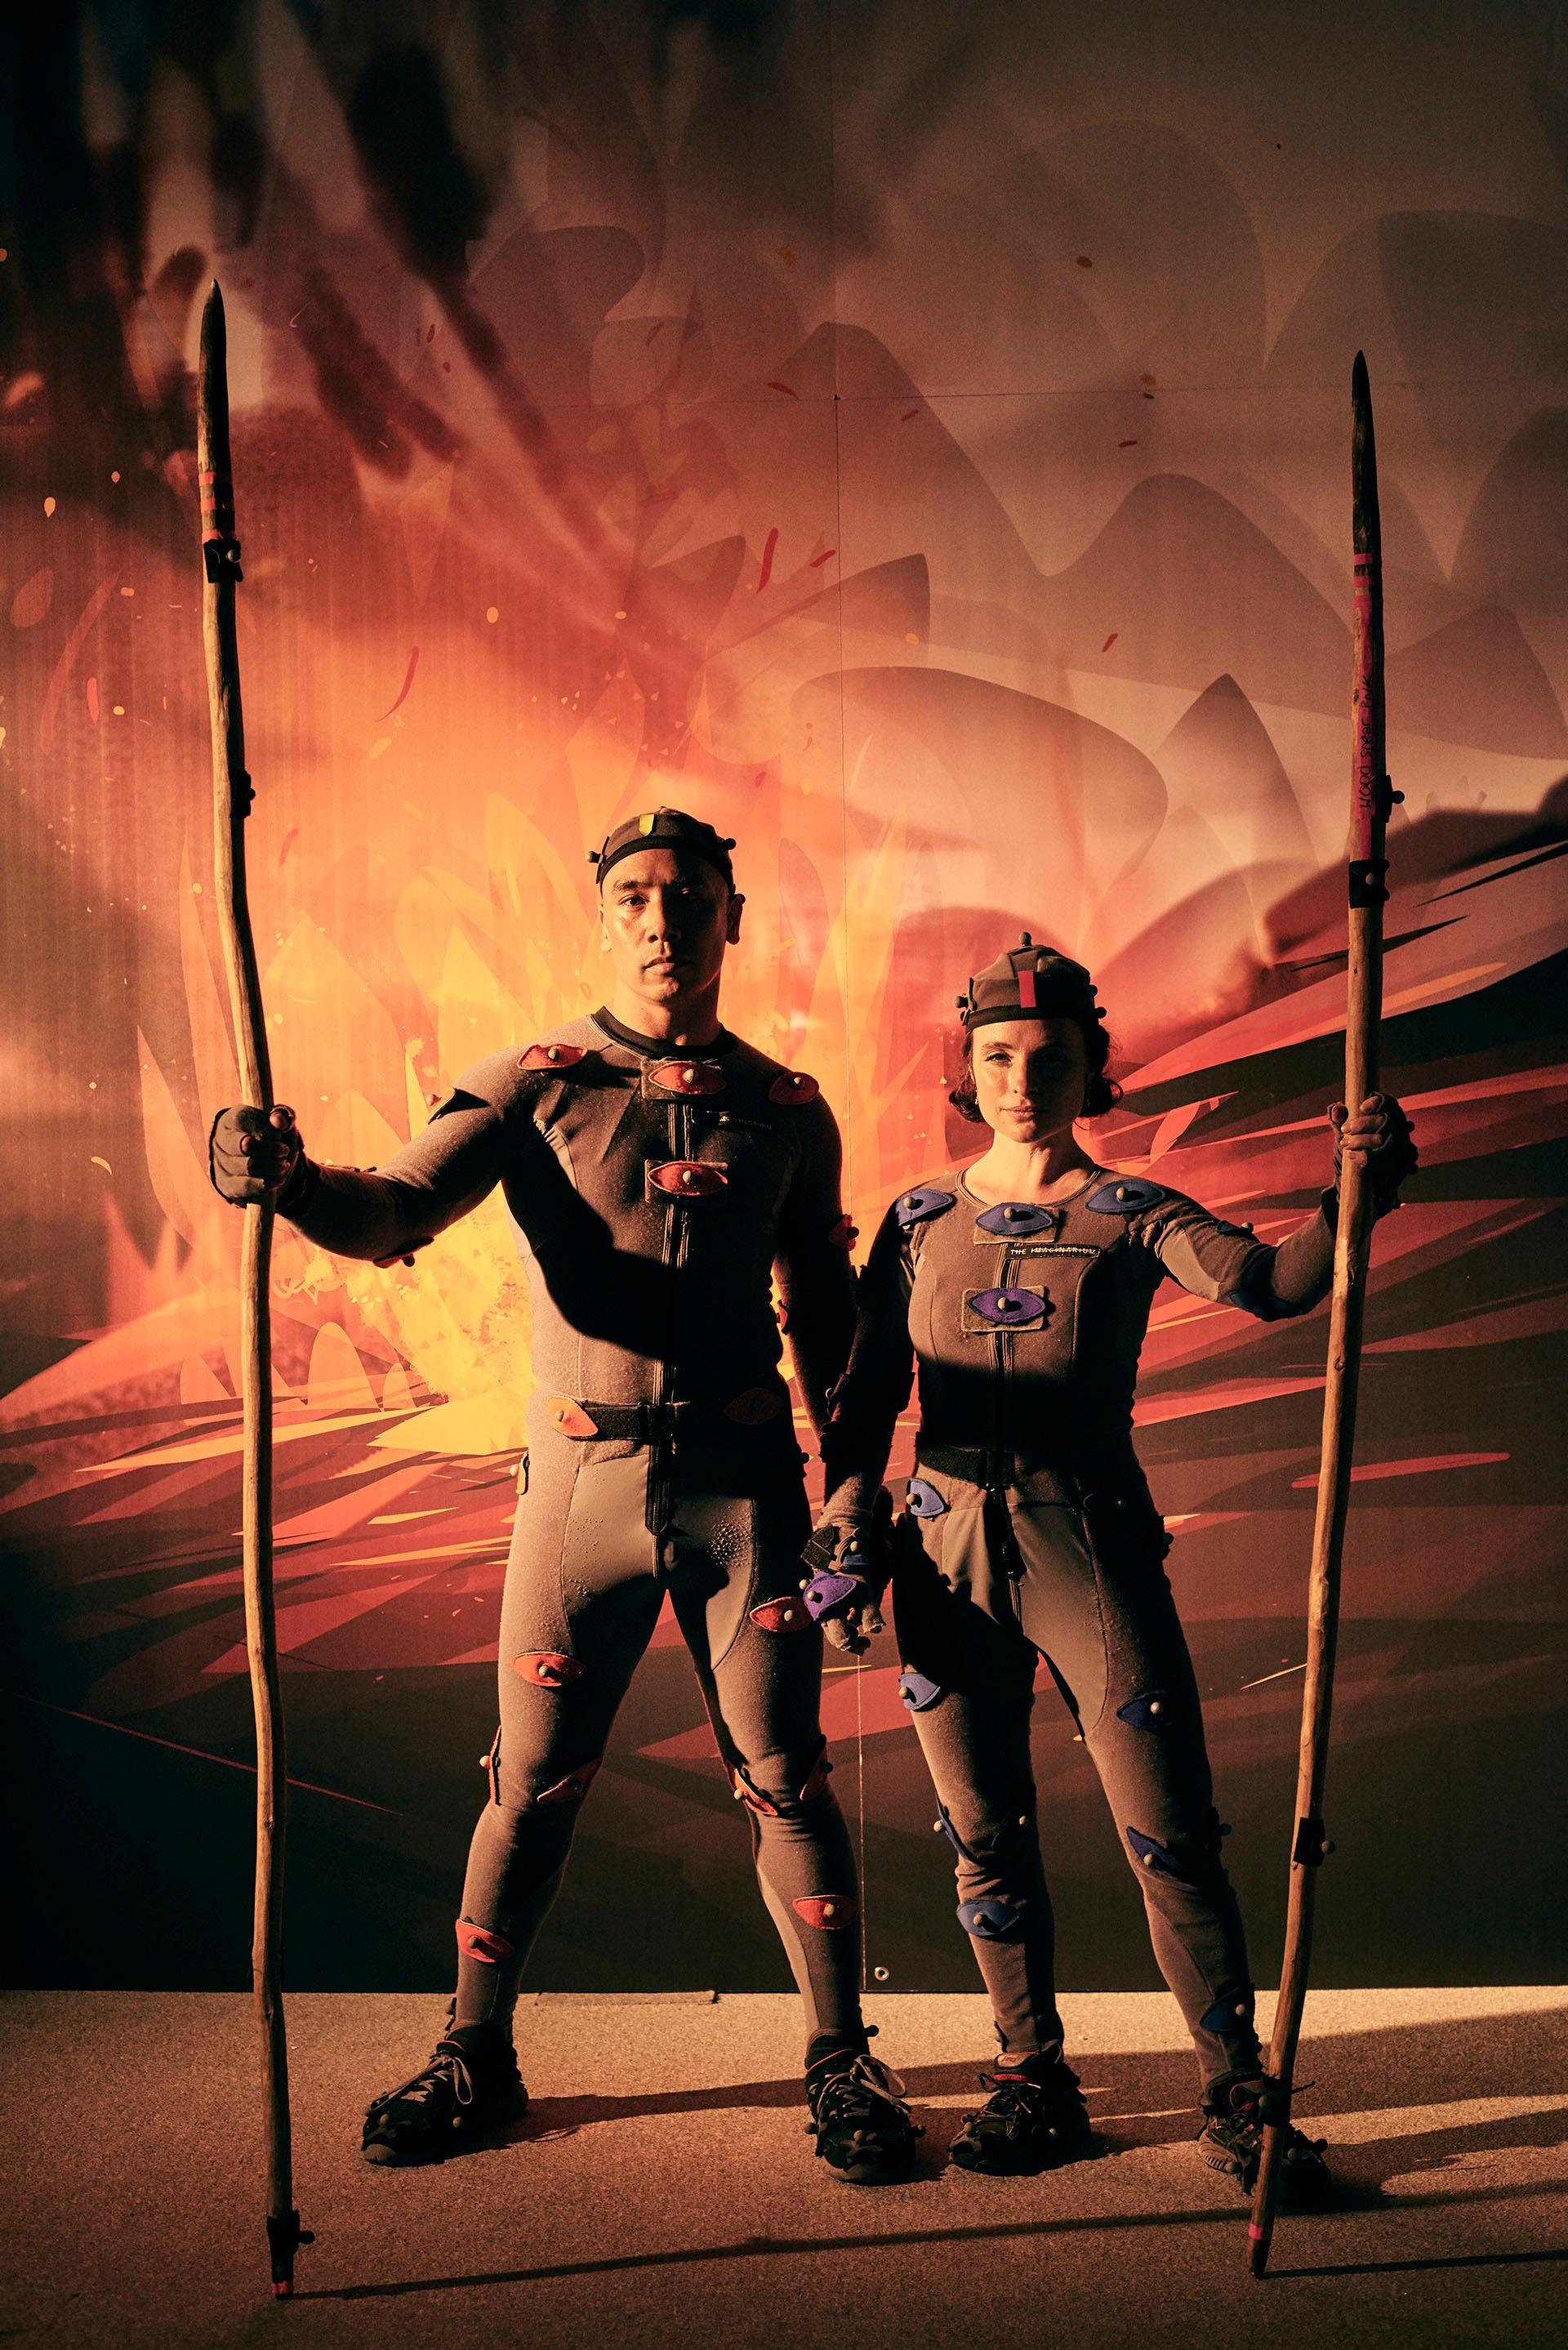 Nick Kellington (actor) and Cecily Fay (actress) wearing motion capture suit.